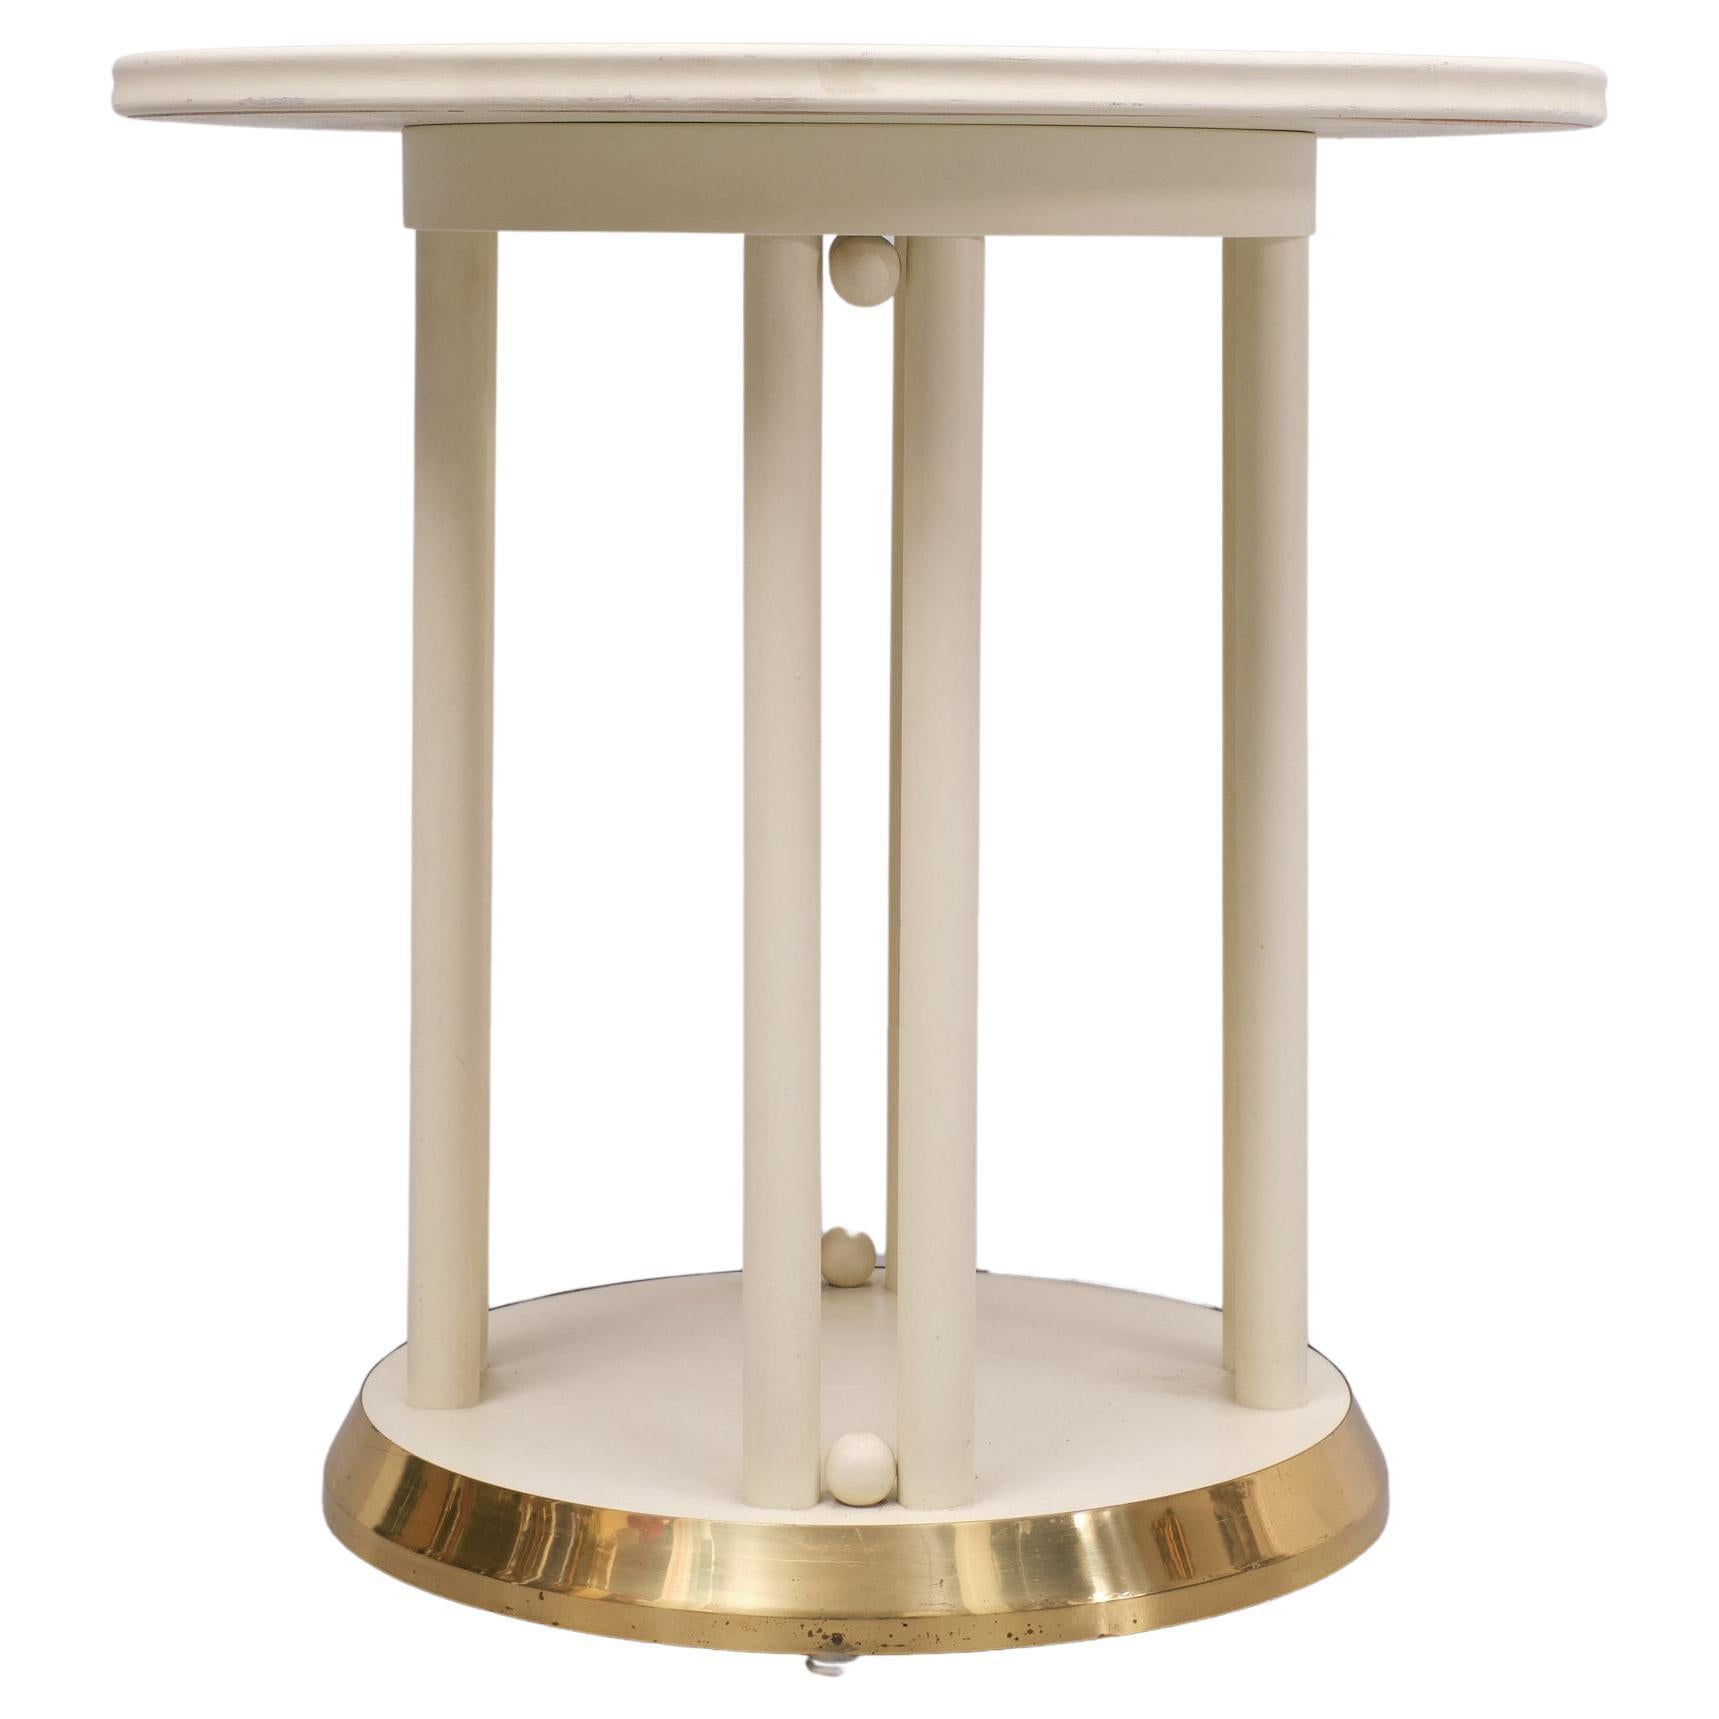 Round cocktail Table designed by Josef Hoffmann,  circa 1910 for Cabaret Fledermaus in Vienna. Manufactured by Wittmann   (Austria), circa 1960.
Lacquered Beech wood ,Glass top and original upholstery.
With manufacturers label to the underside.

In